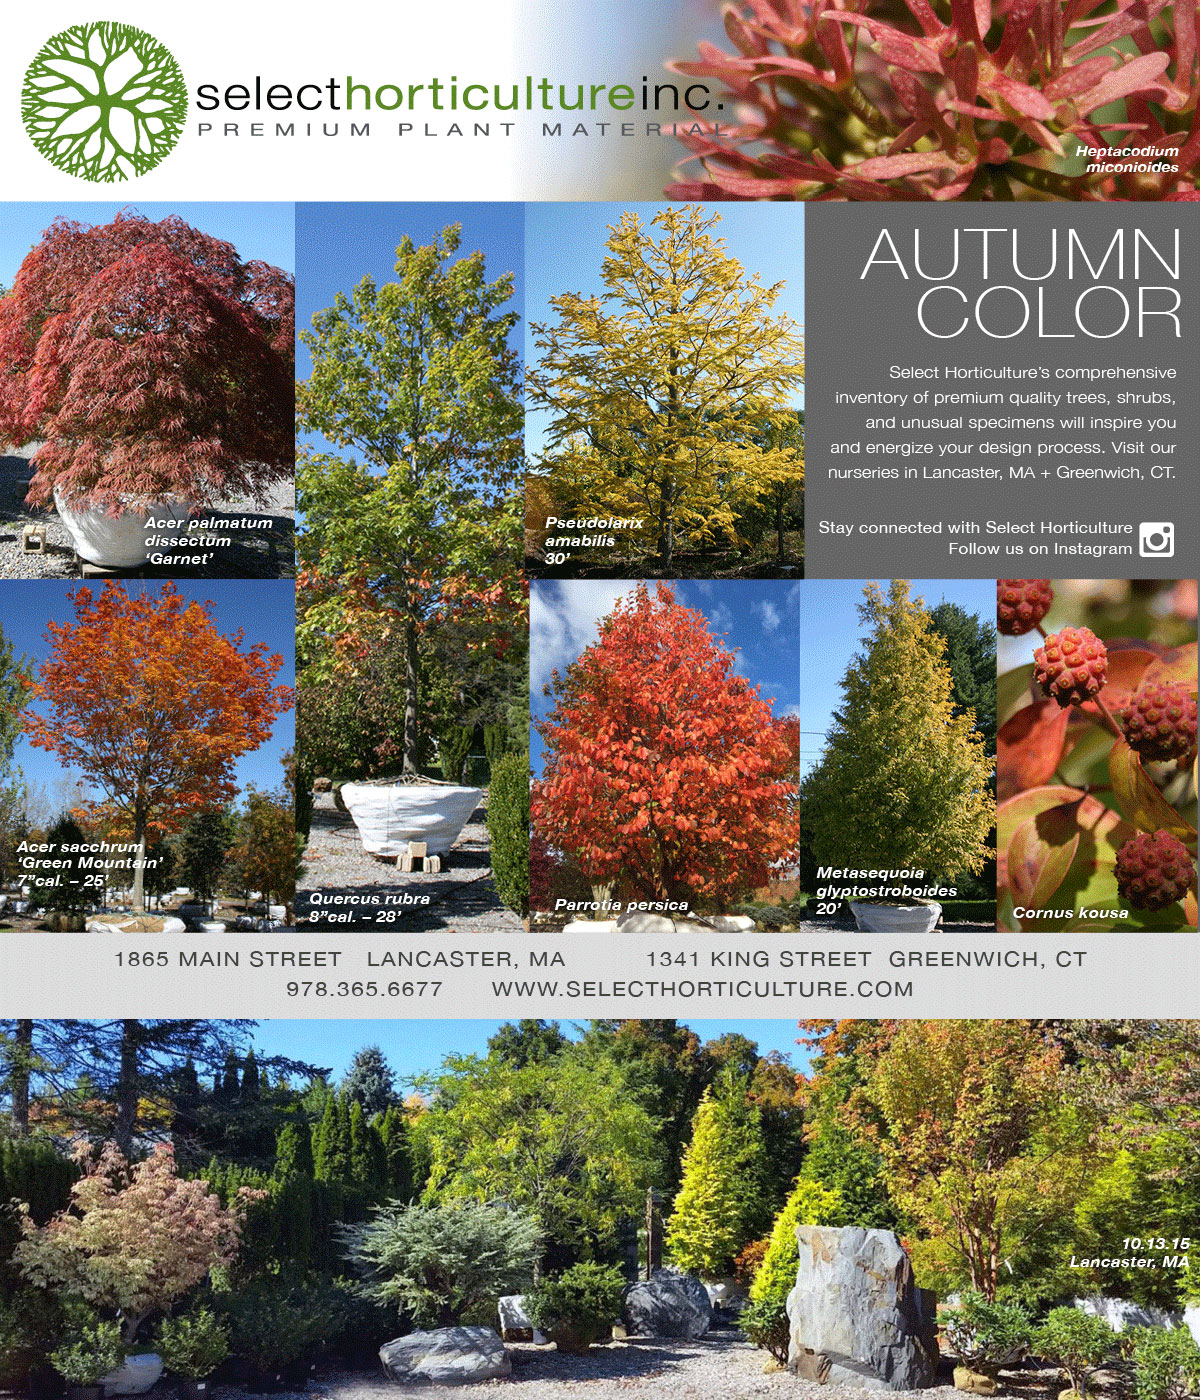 Autumn Color at Select Horticulture